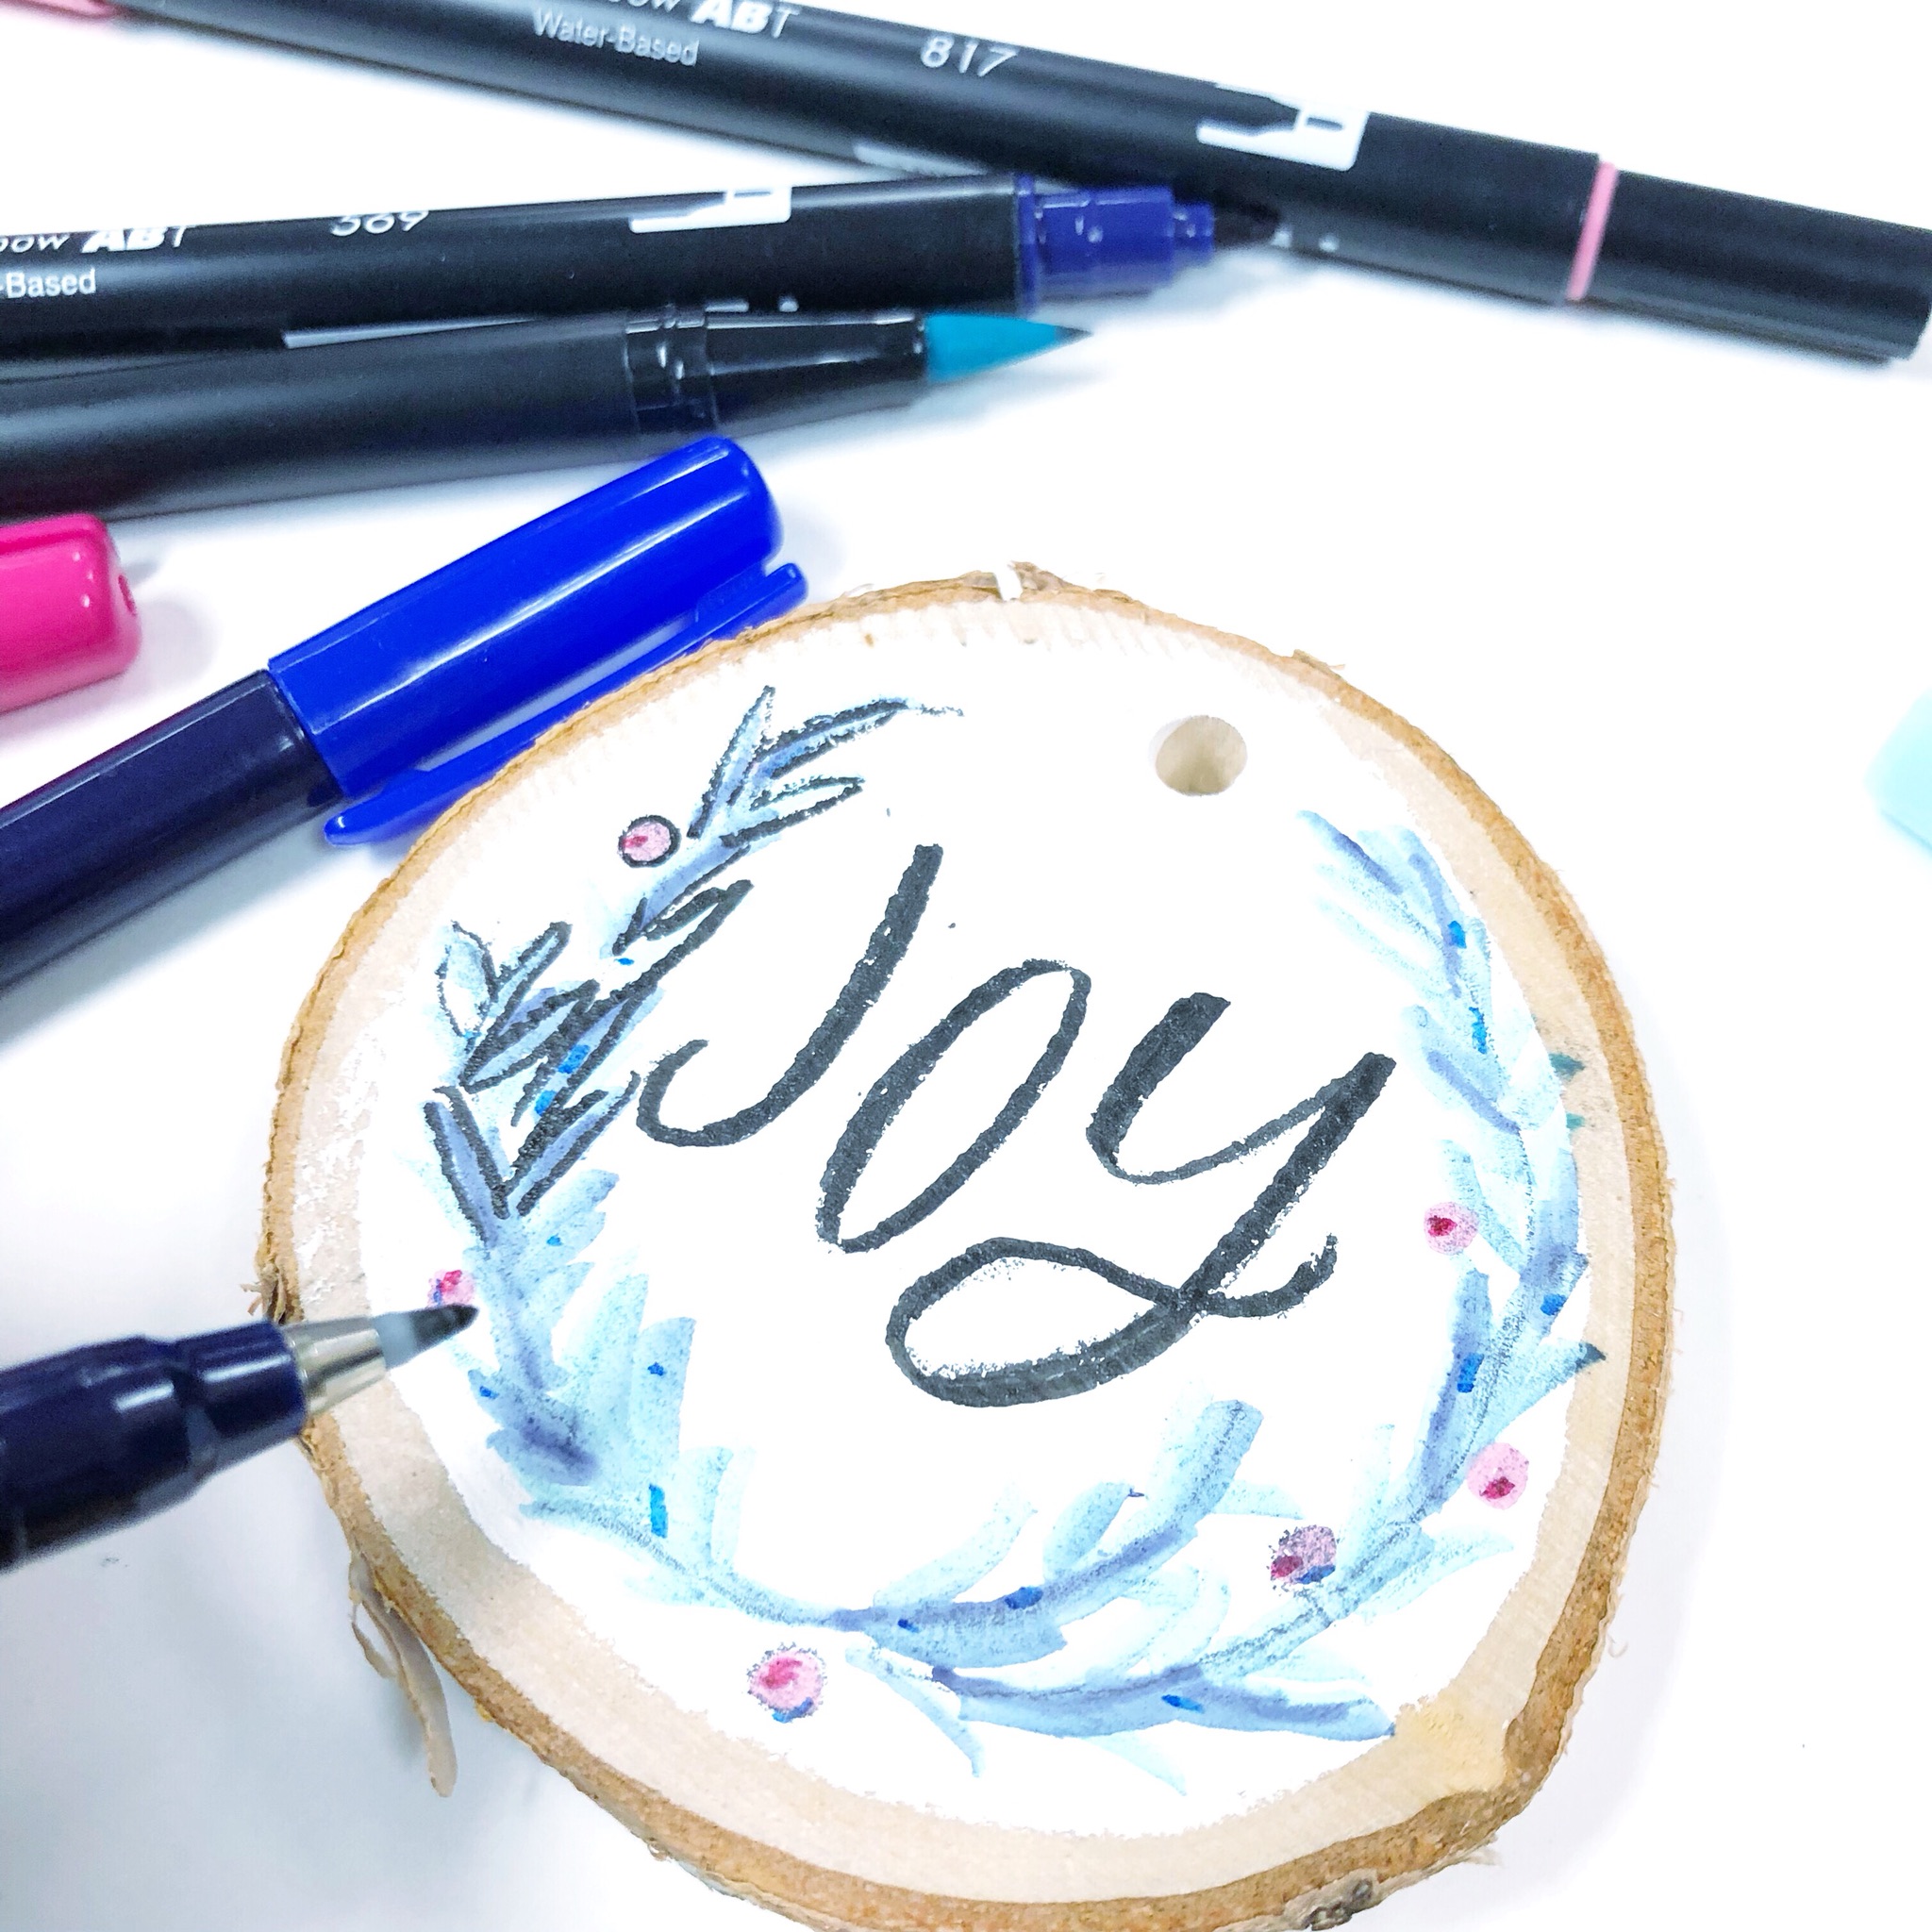 Lauren Fitzmaurice of Renmade Calligraphy shows you step by step how to create your own handlettered wood slice tags and ornaments using a few of her favorite Tombow USA supplies.